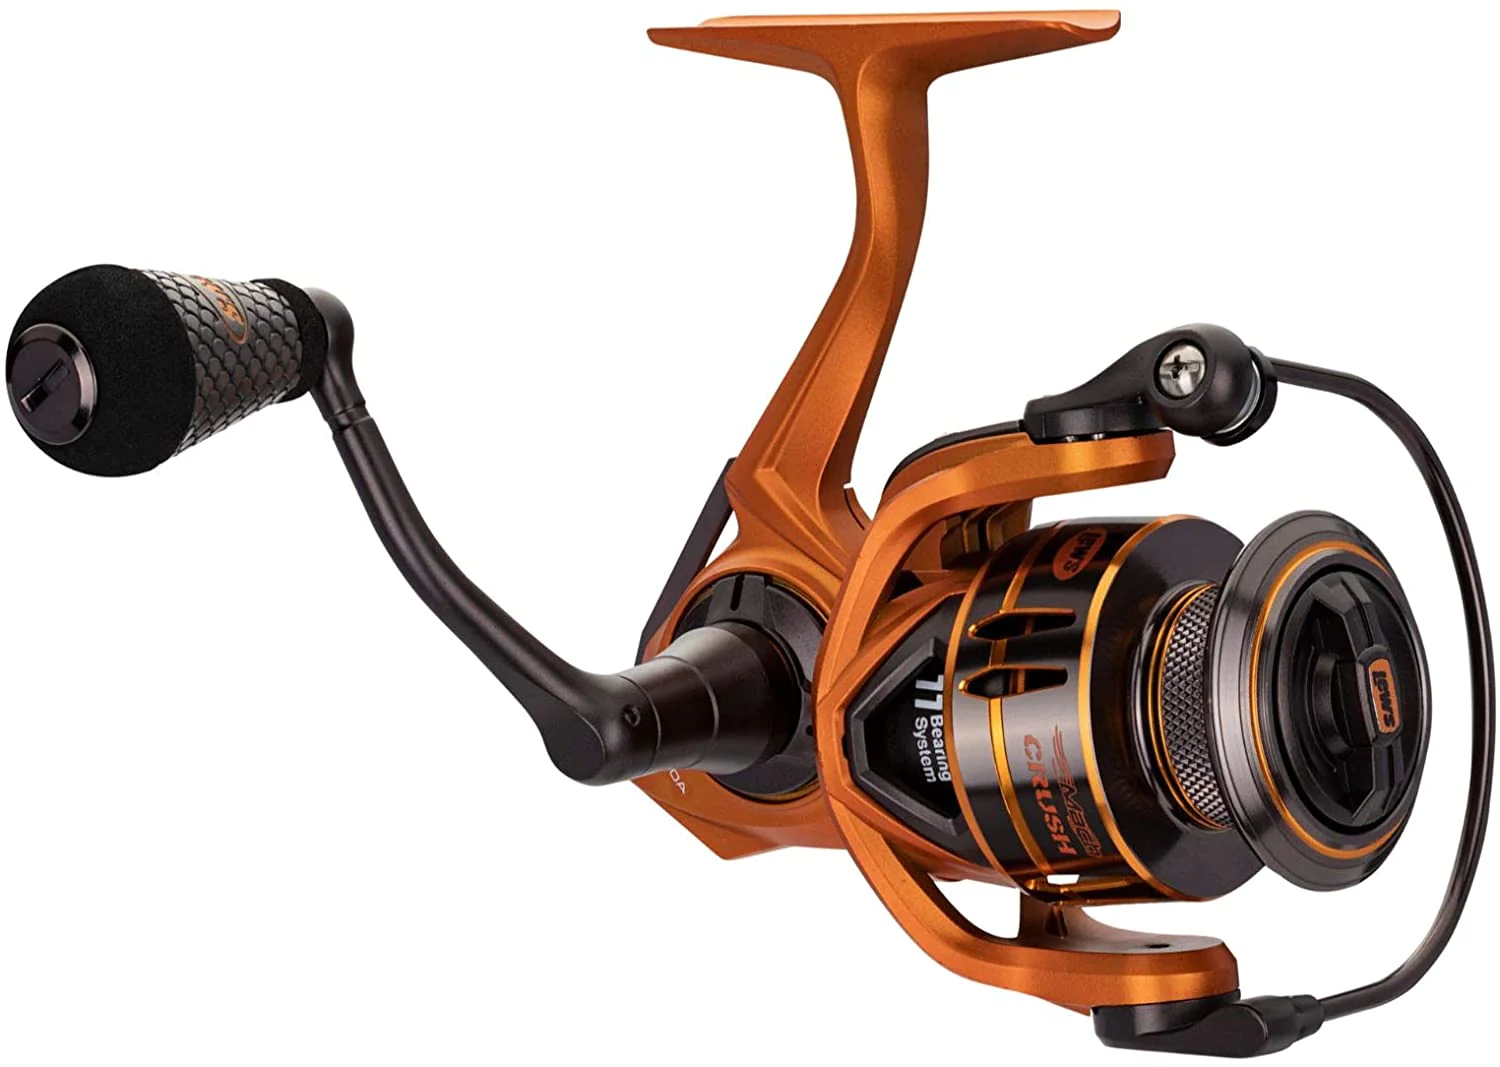 Lew's Mach Crush 6.2:1 Spinning Reel - MCR300A for sale online